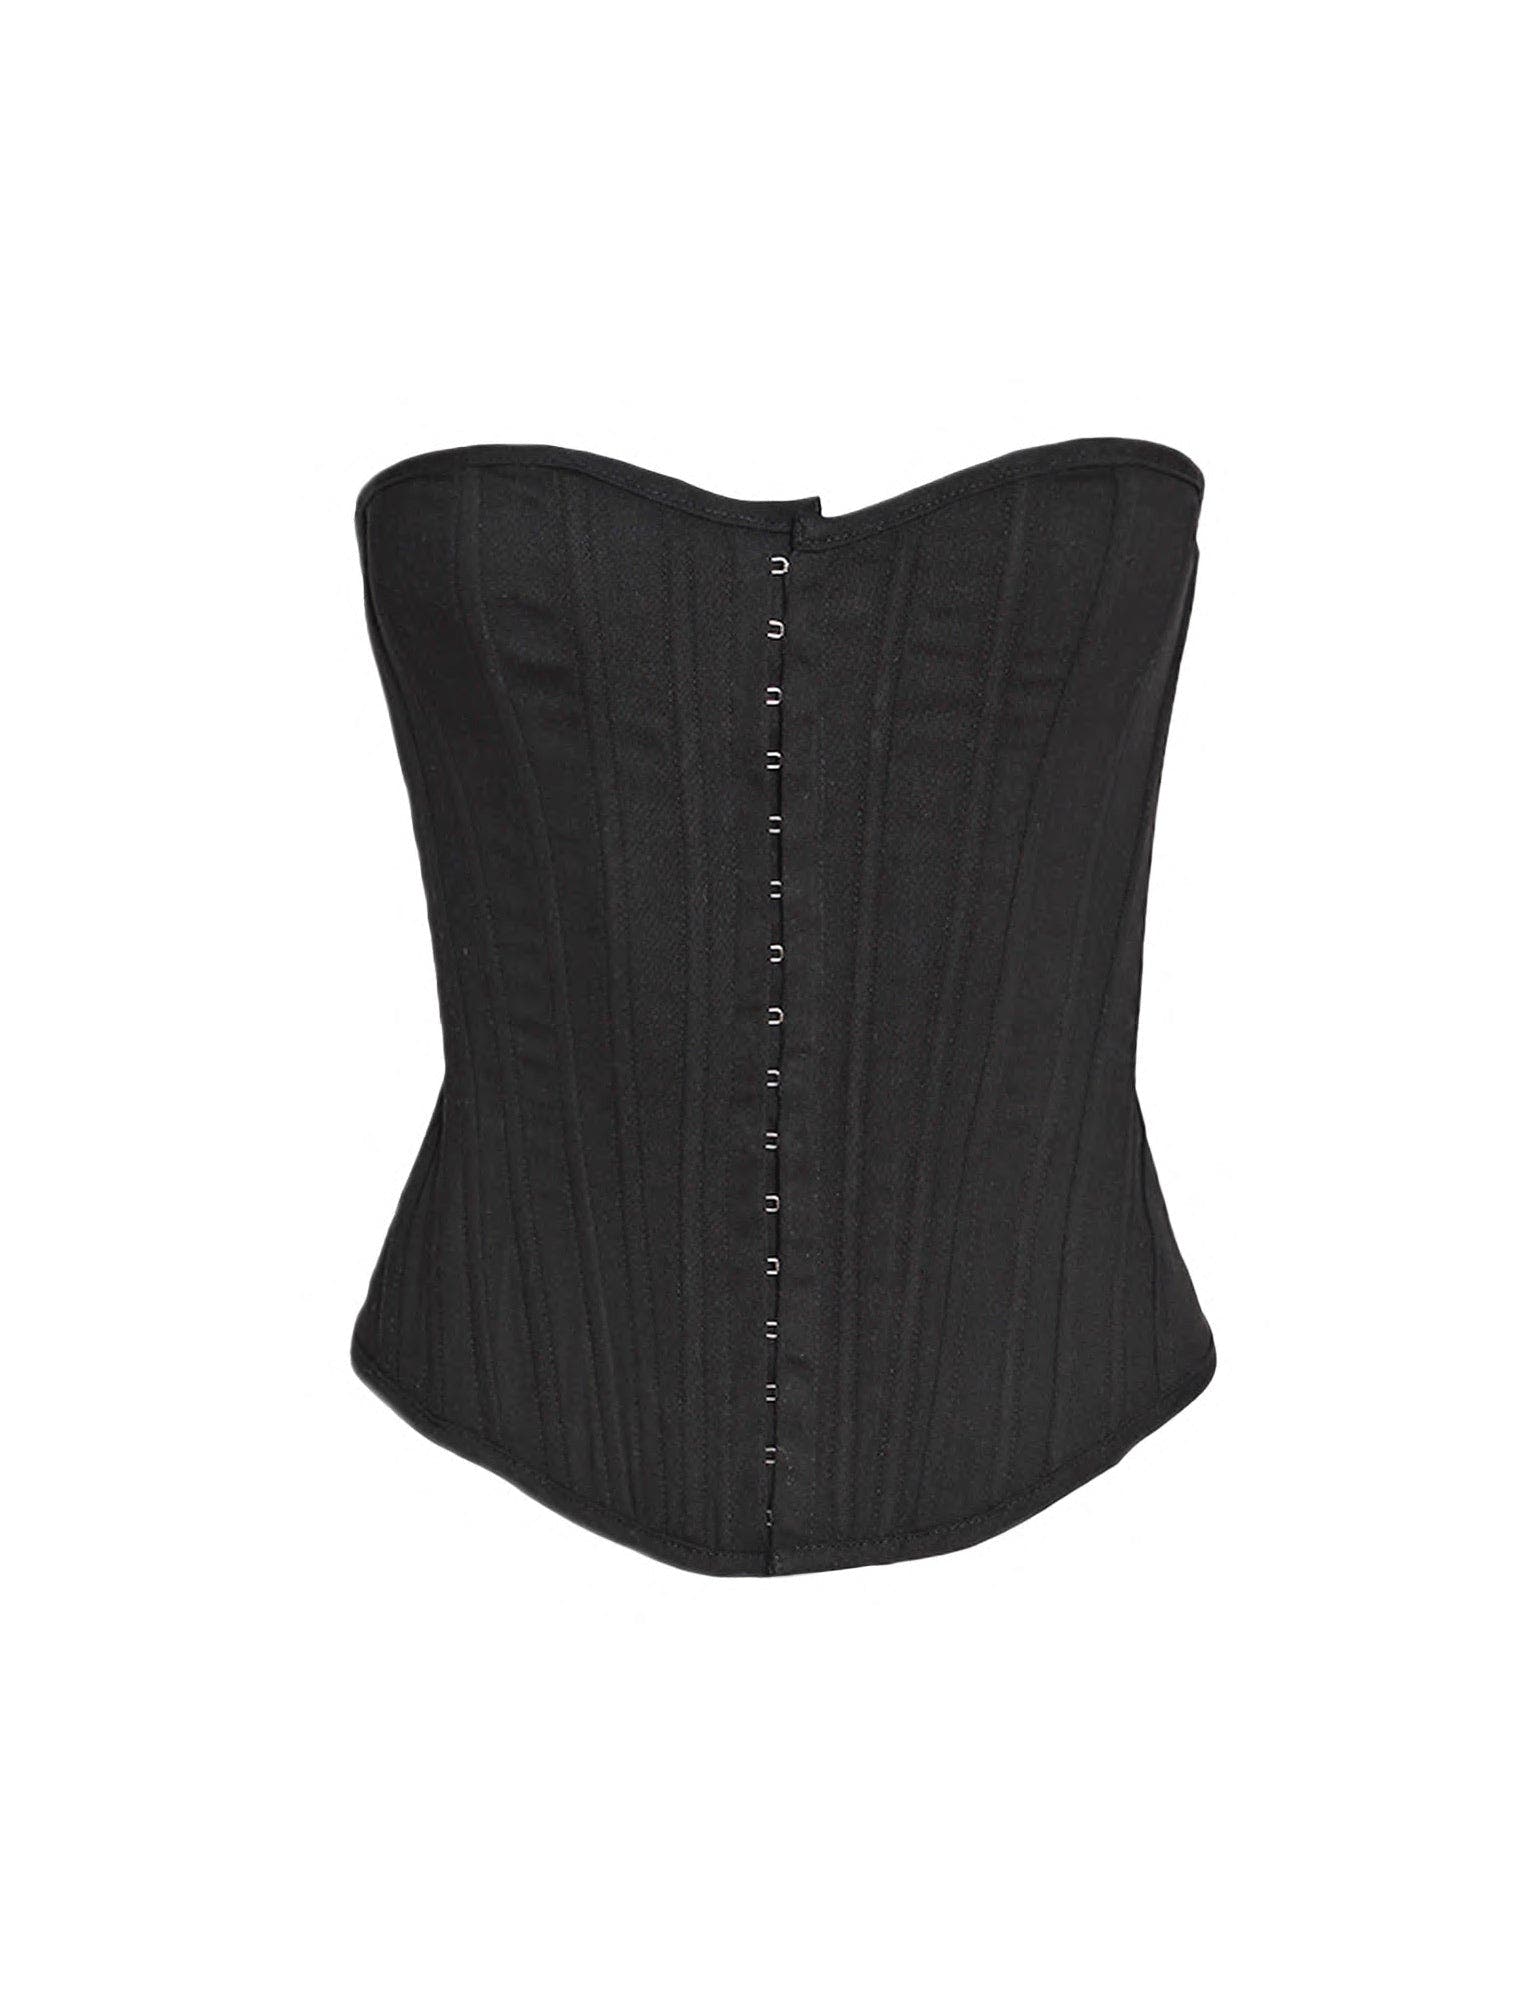 MILLY TOP - BLACK